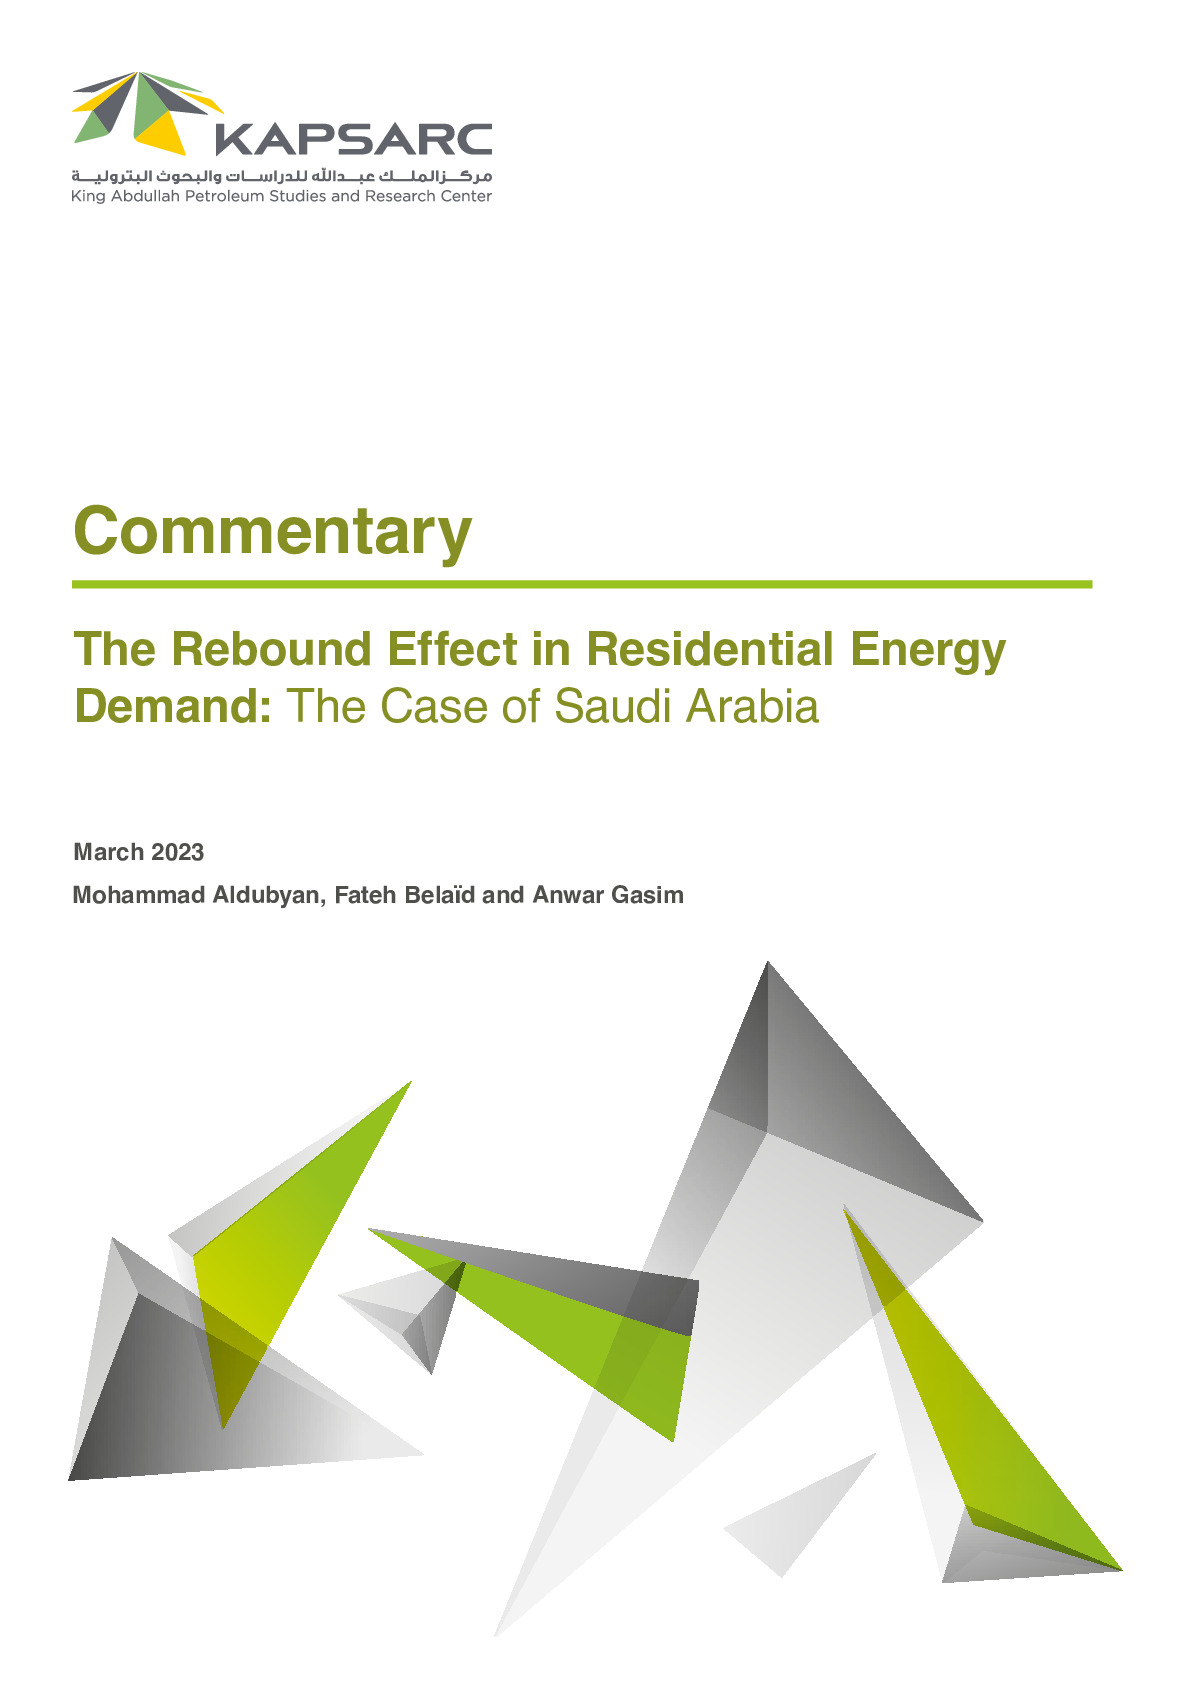 The Rebound Effect in Residential Energy Demand: The Case of Saudi Arabia